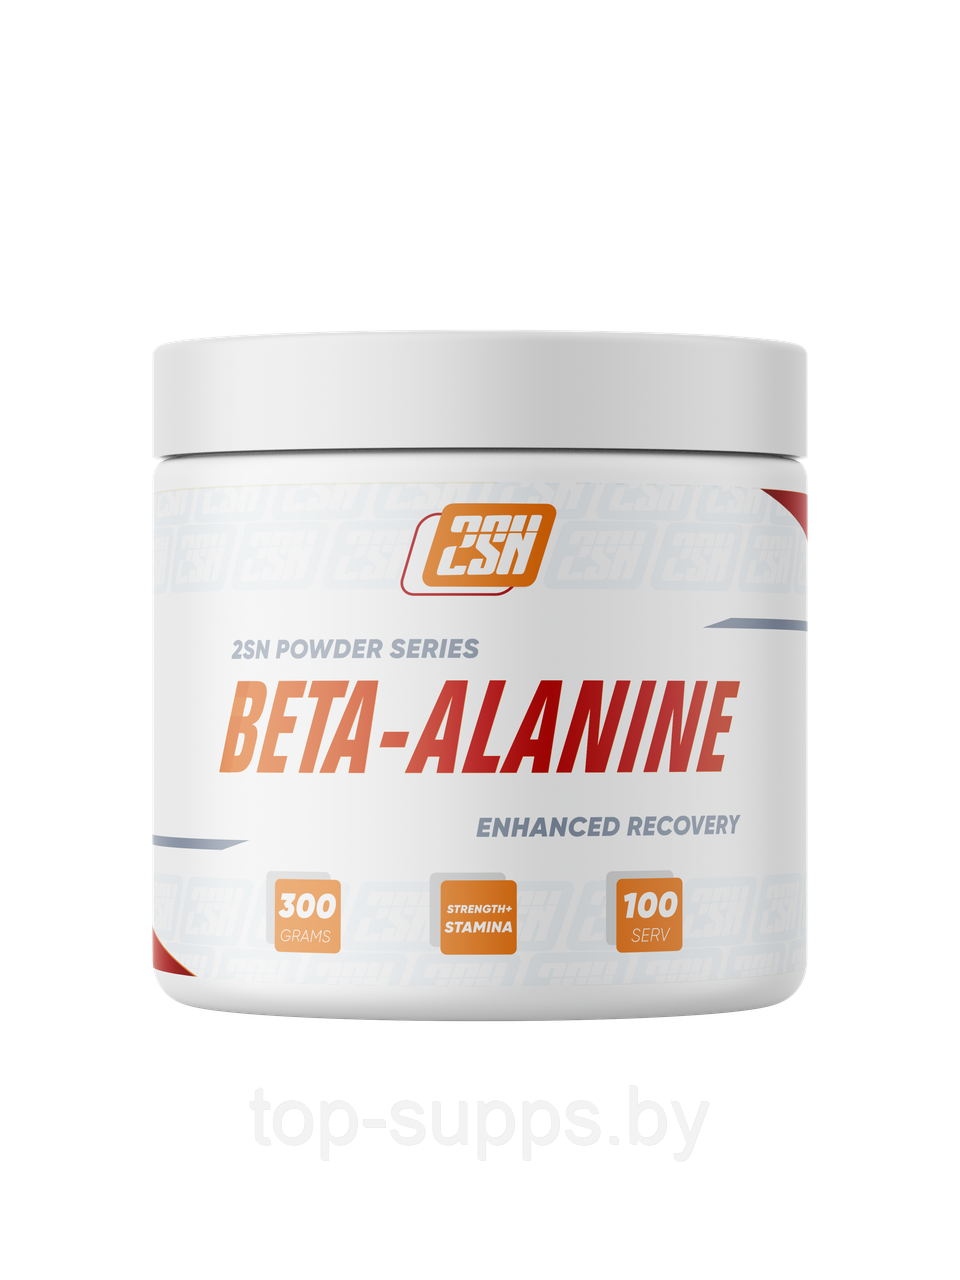 2SN Beta Alanine from 2SN, 300 g (100 servings) - фото 1 - id-p208806365